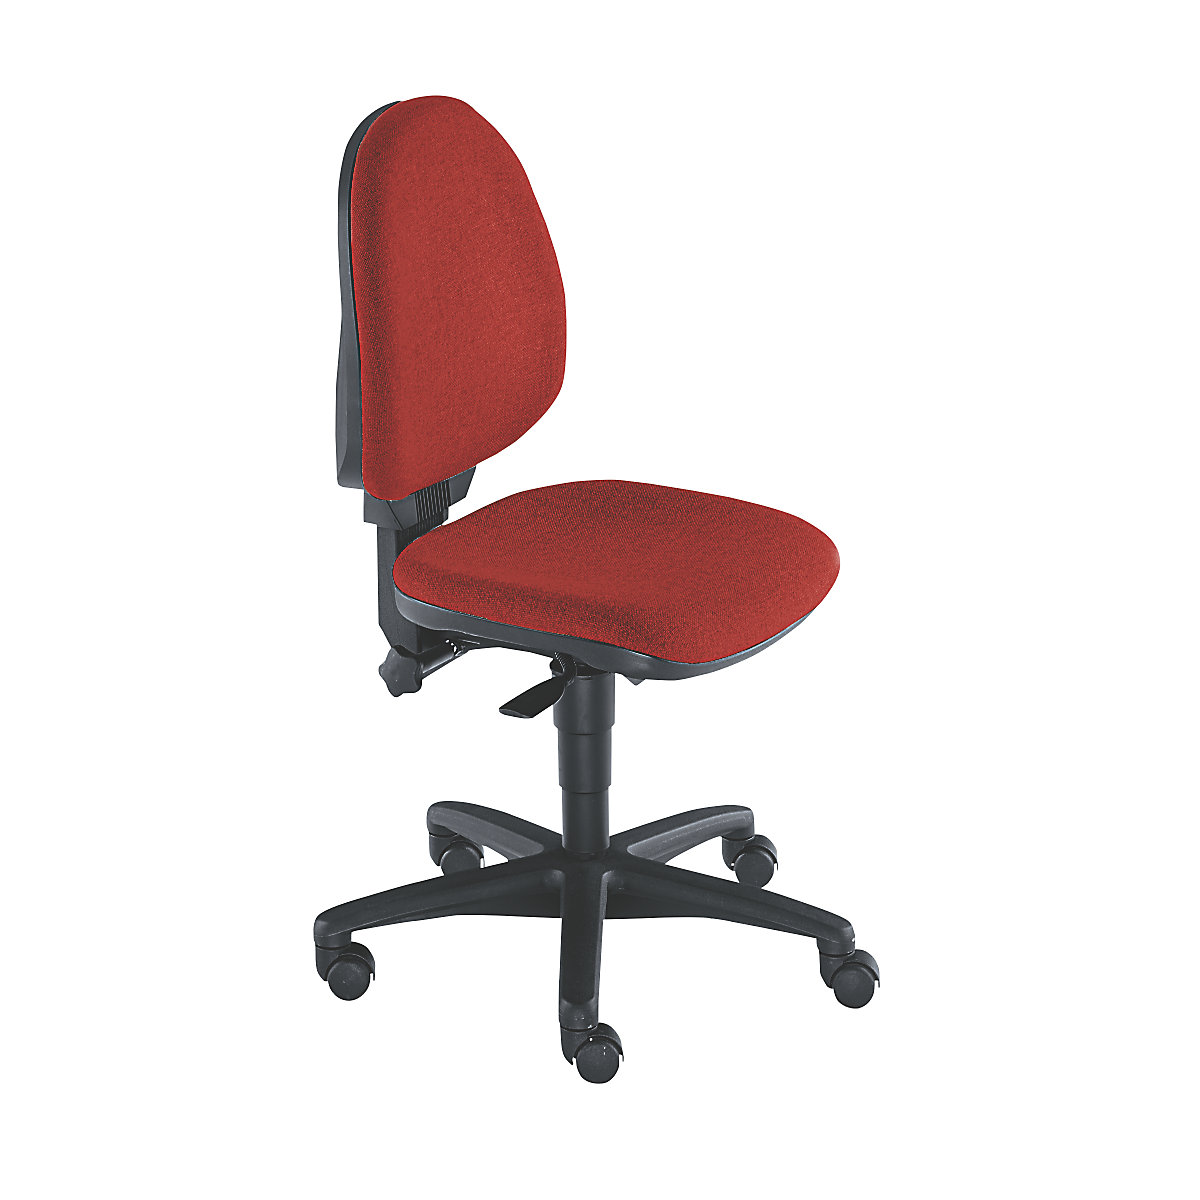 Standard swivel chair – Topstar, without arm rests, back rest 450 mm, red fabric, black frame-4